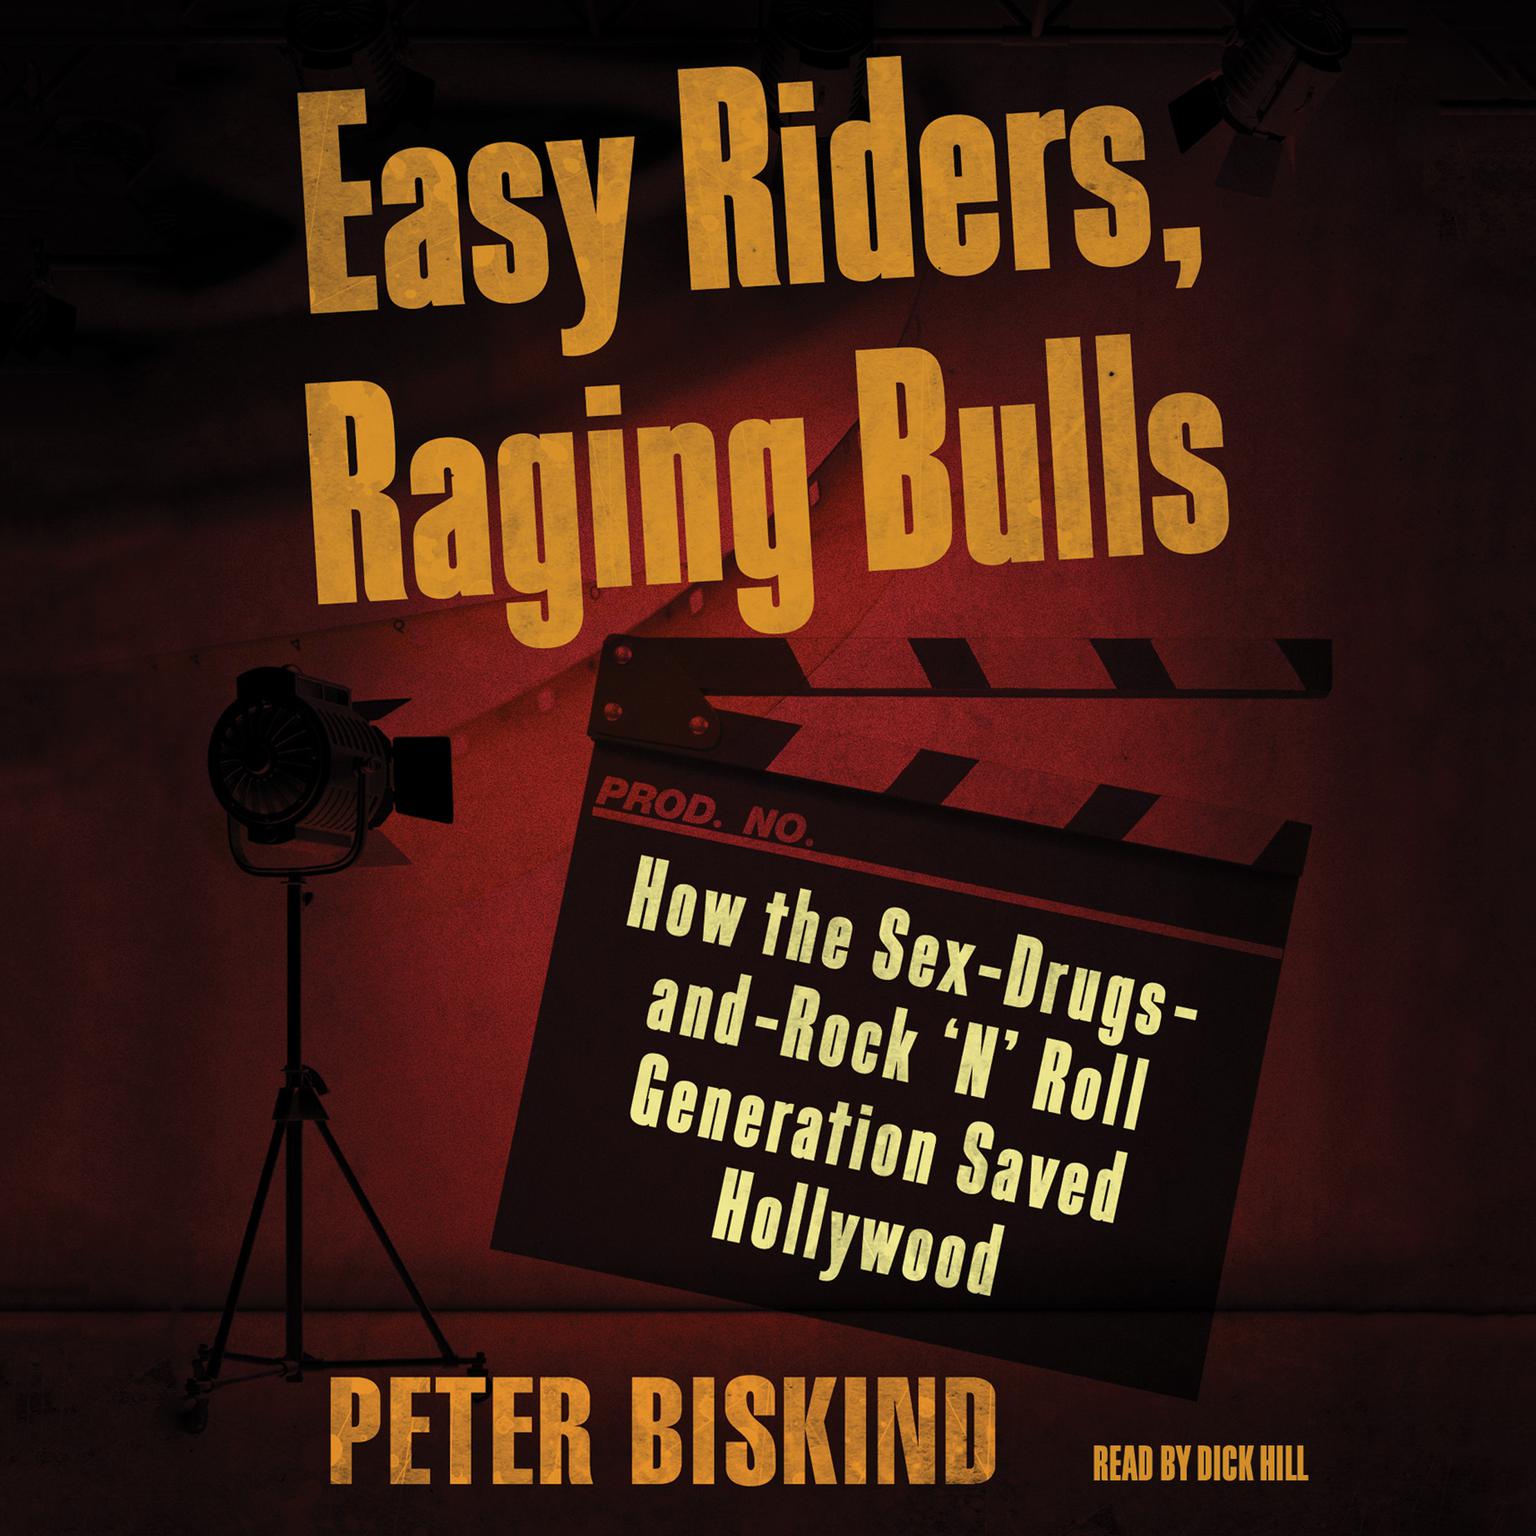 Easy Riders, Raging Bulls: How the Sex-Drugs-and-Rock N Roll Generation Saved Hollywood Audiobook, by Peter Biskind